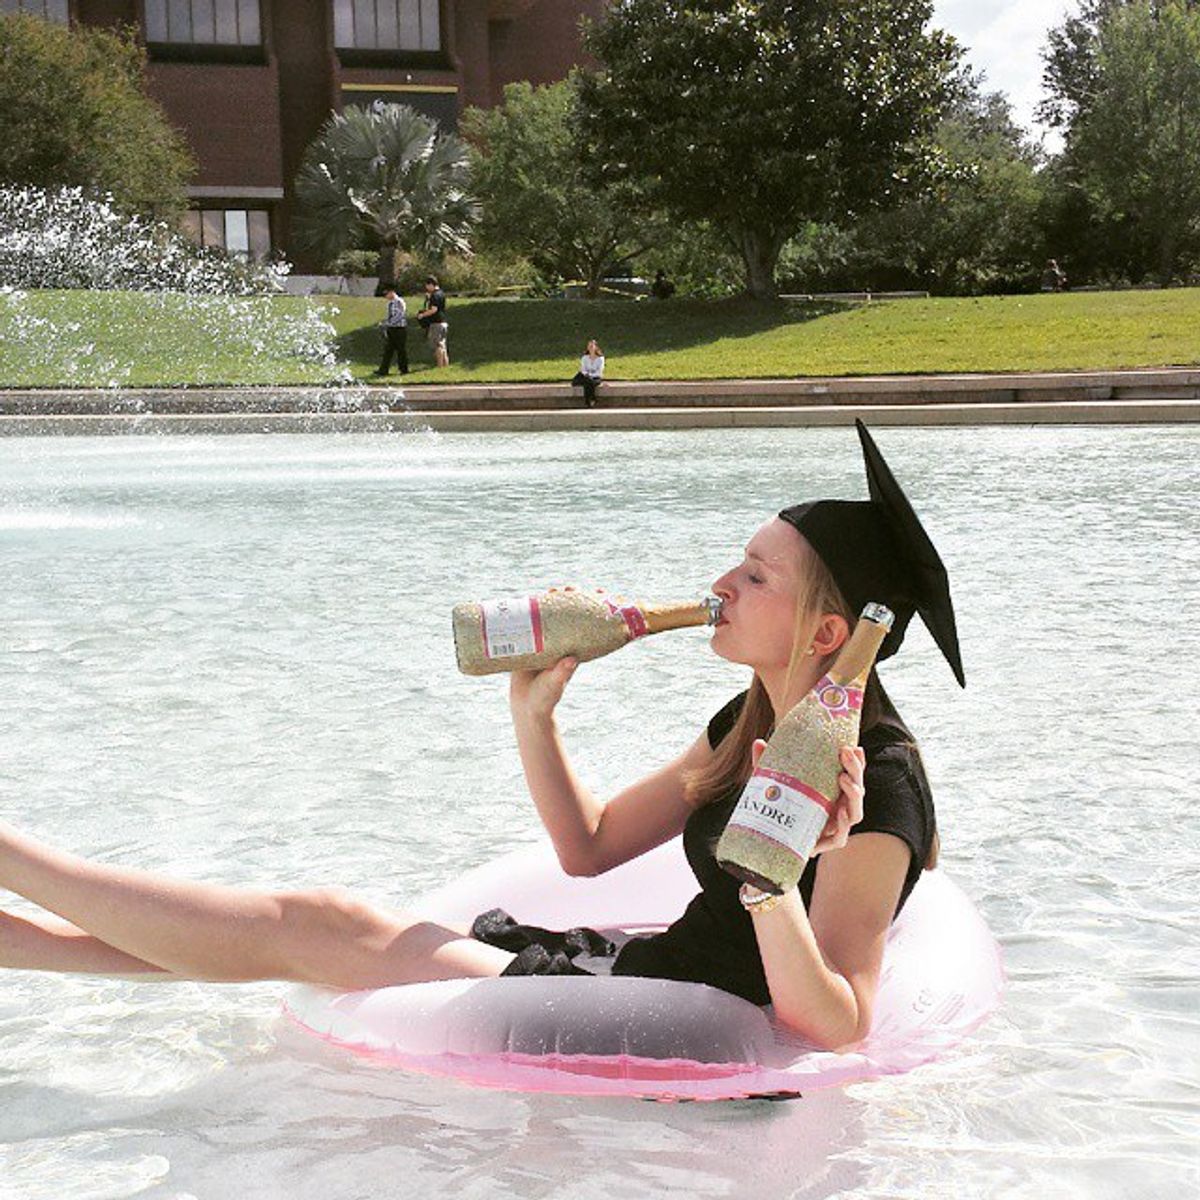 The Typical College Experience (As Told By Someone Not Living It)